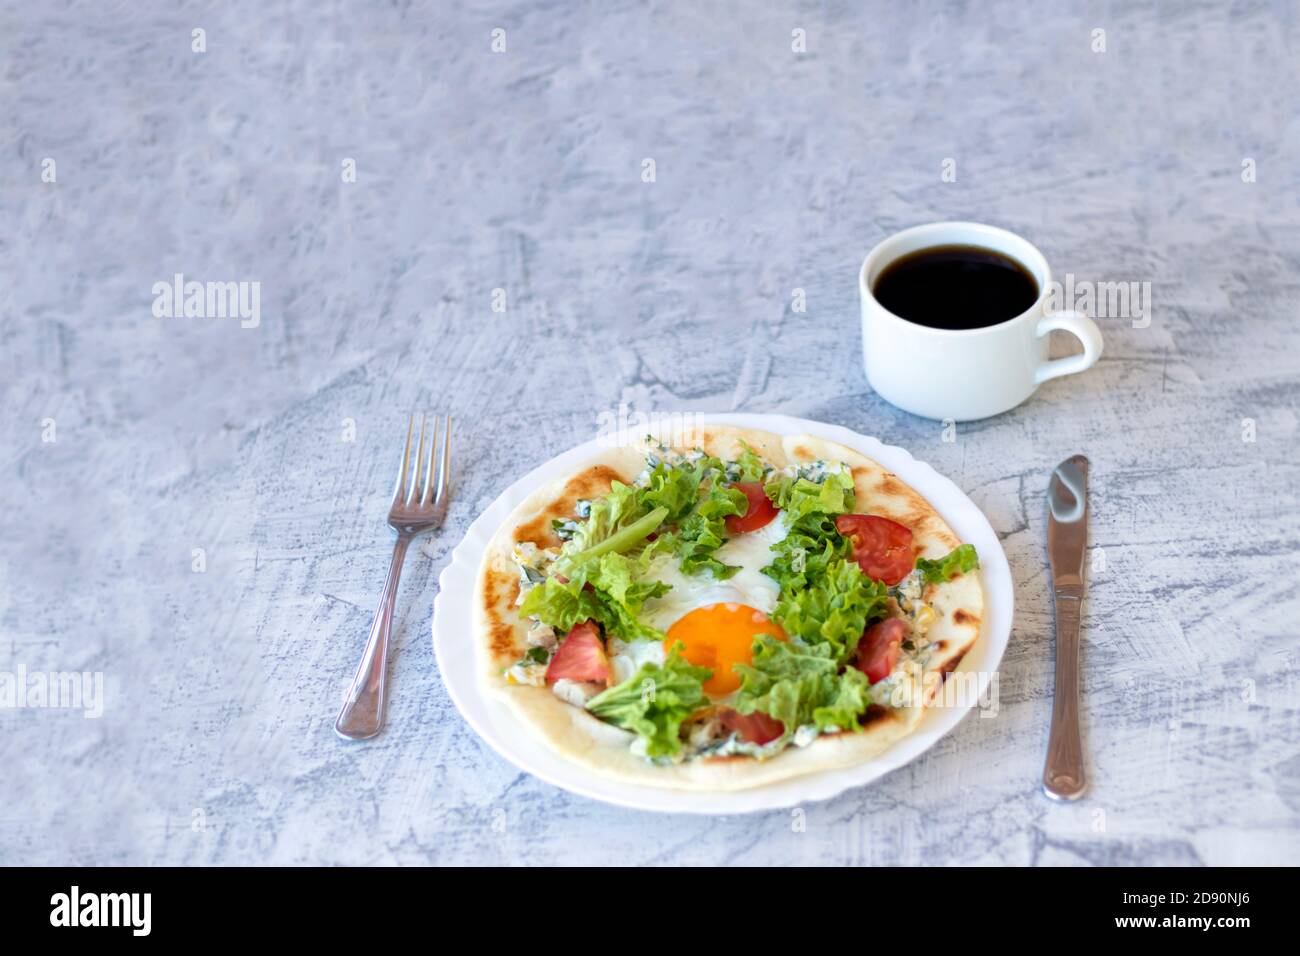 Italian breakfast with coffee. Piadina with egg, tomatoes and salad. Delicious breakfast served on textured table. Soft focus Stock Photo